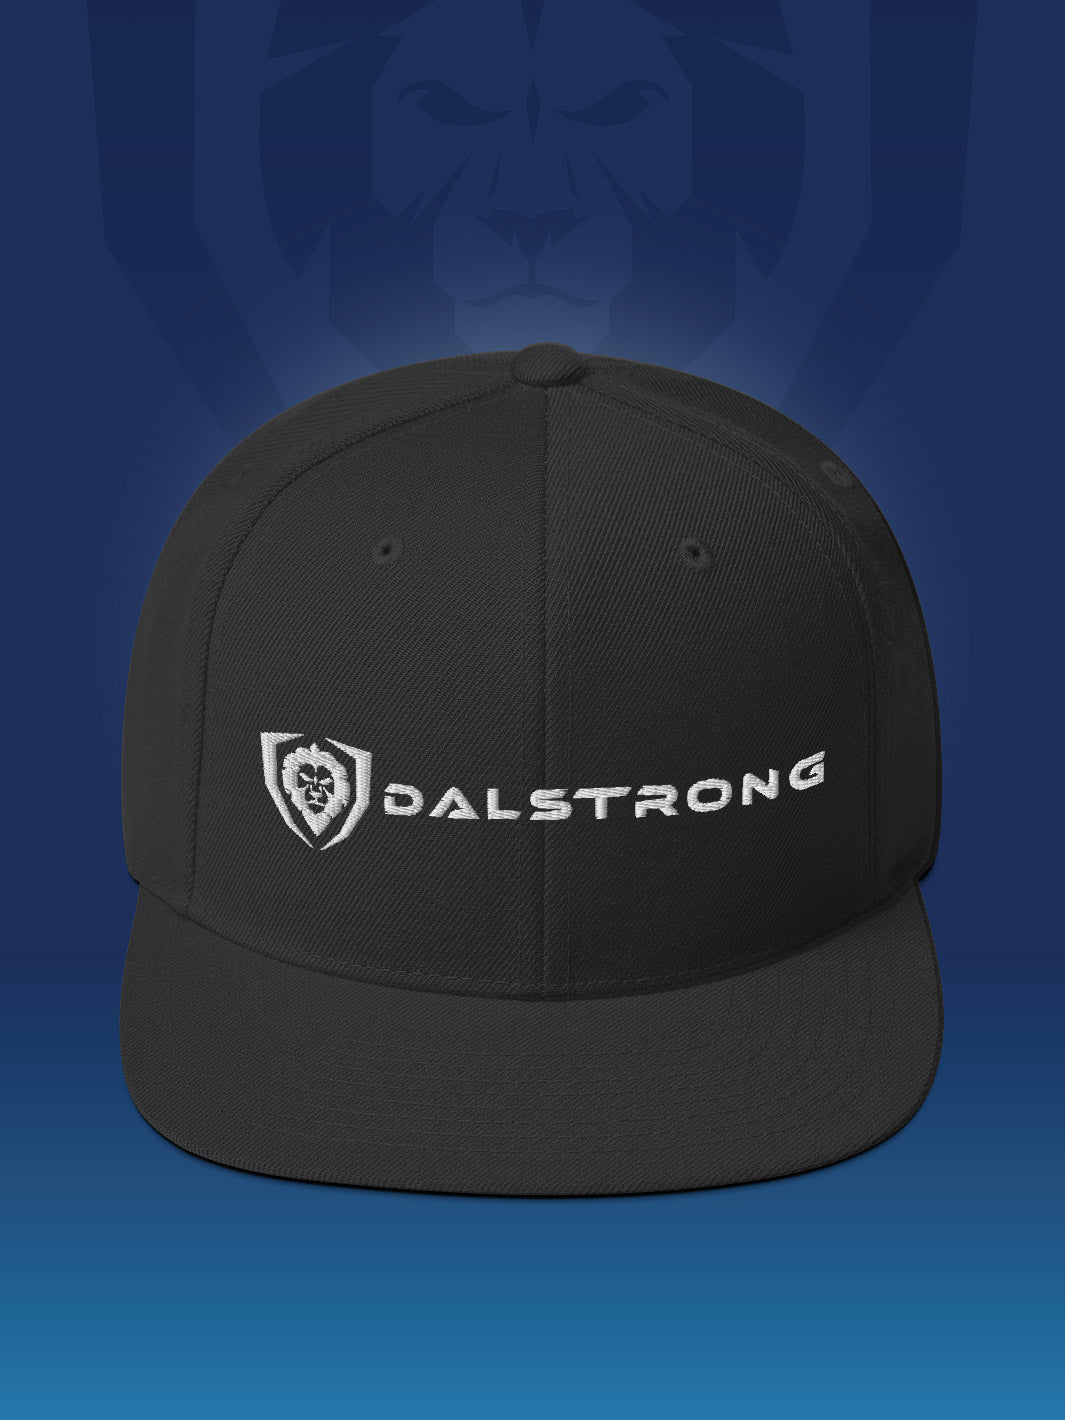 Dalstrong apparel make it snappy snapback hat classic logo.